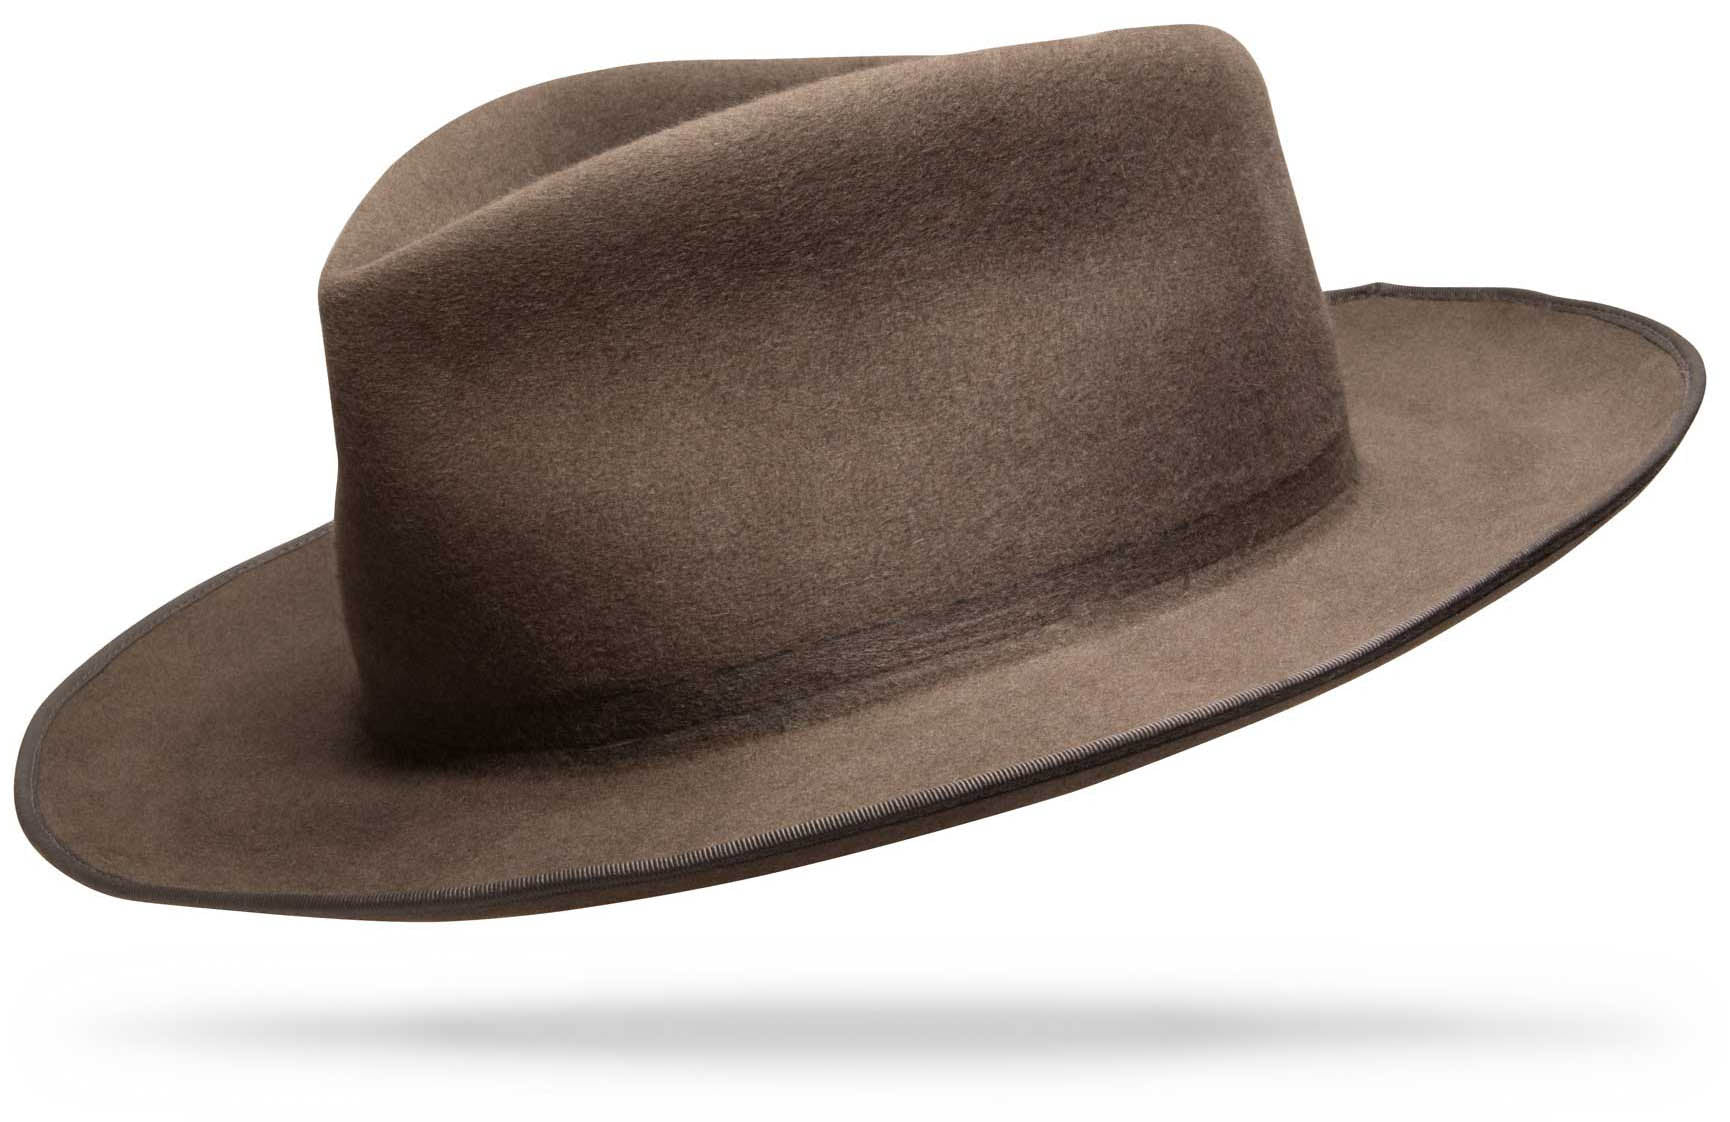 Design
The iconic Chief Hopper's Hat was created for David Harbour's character in Stranger Things. Abruptly emerging from the proverbial Upside Down, Stranger Things has taken its place as a pop culture phenomenon, bringing the Hopper right along with it. This hat will be custom made for you. 
Material
100% Western Beaver Fur Felt Hat sustainably acquired and Weather Refined
Specifications
With its 3 1/2 Teardrop Crown, 2 3/4 brim, and hand-dyed invisible band, this 100% Beaver Felt Weather Refined Hat is a real Workhorse! Handmade in our atelier in NYC.Please allow 6-8 weeks to custom make this special piece.